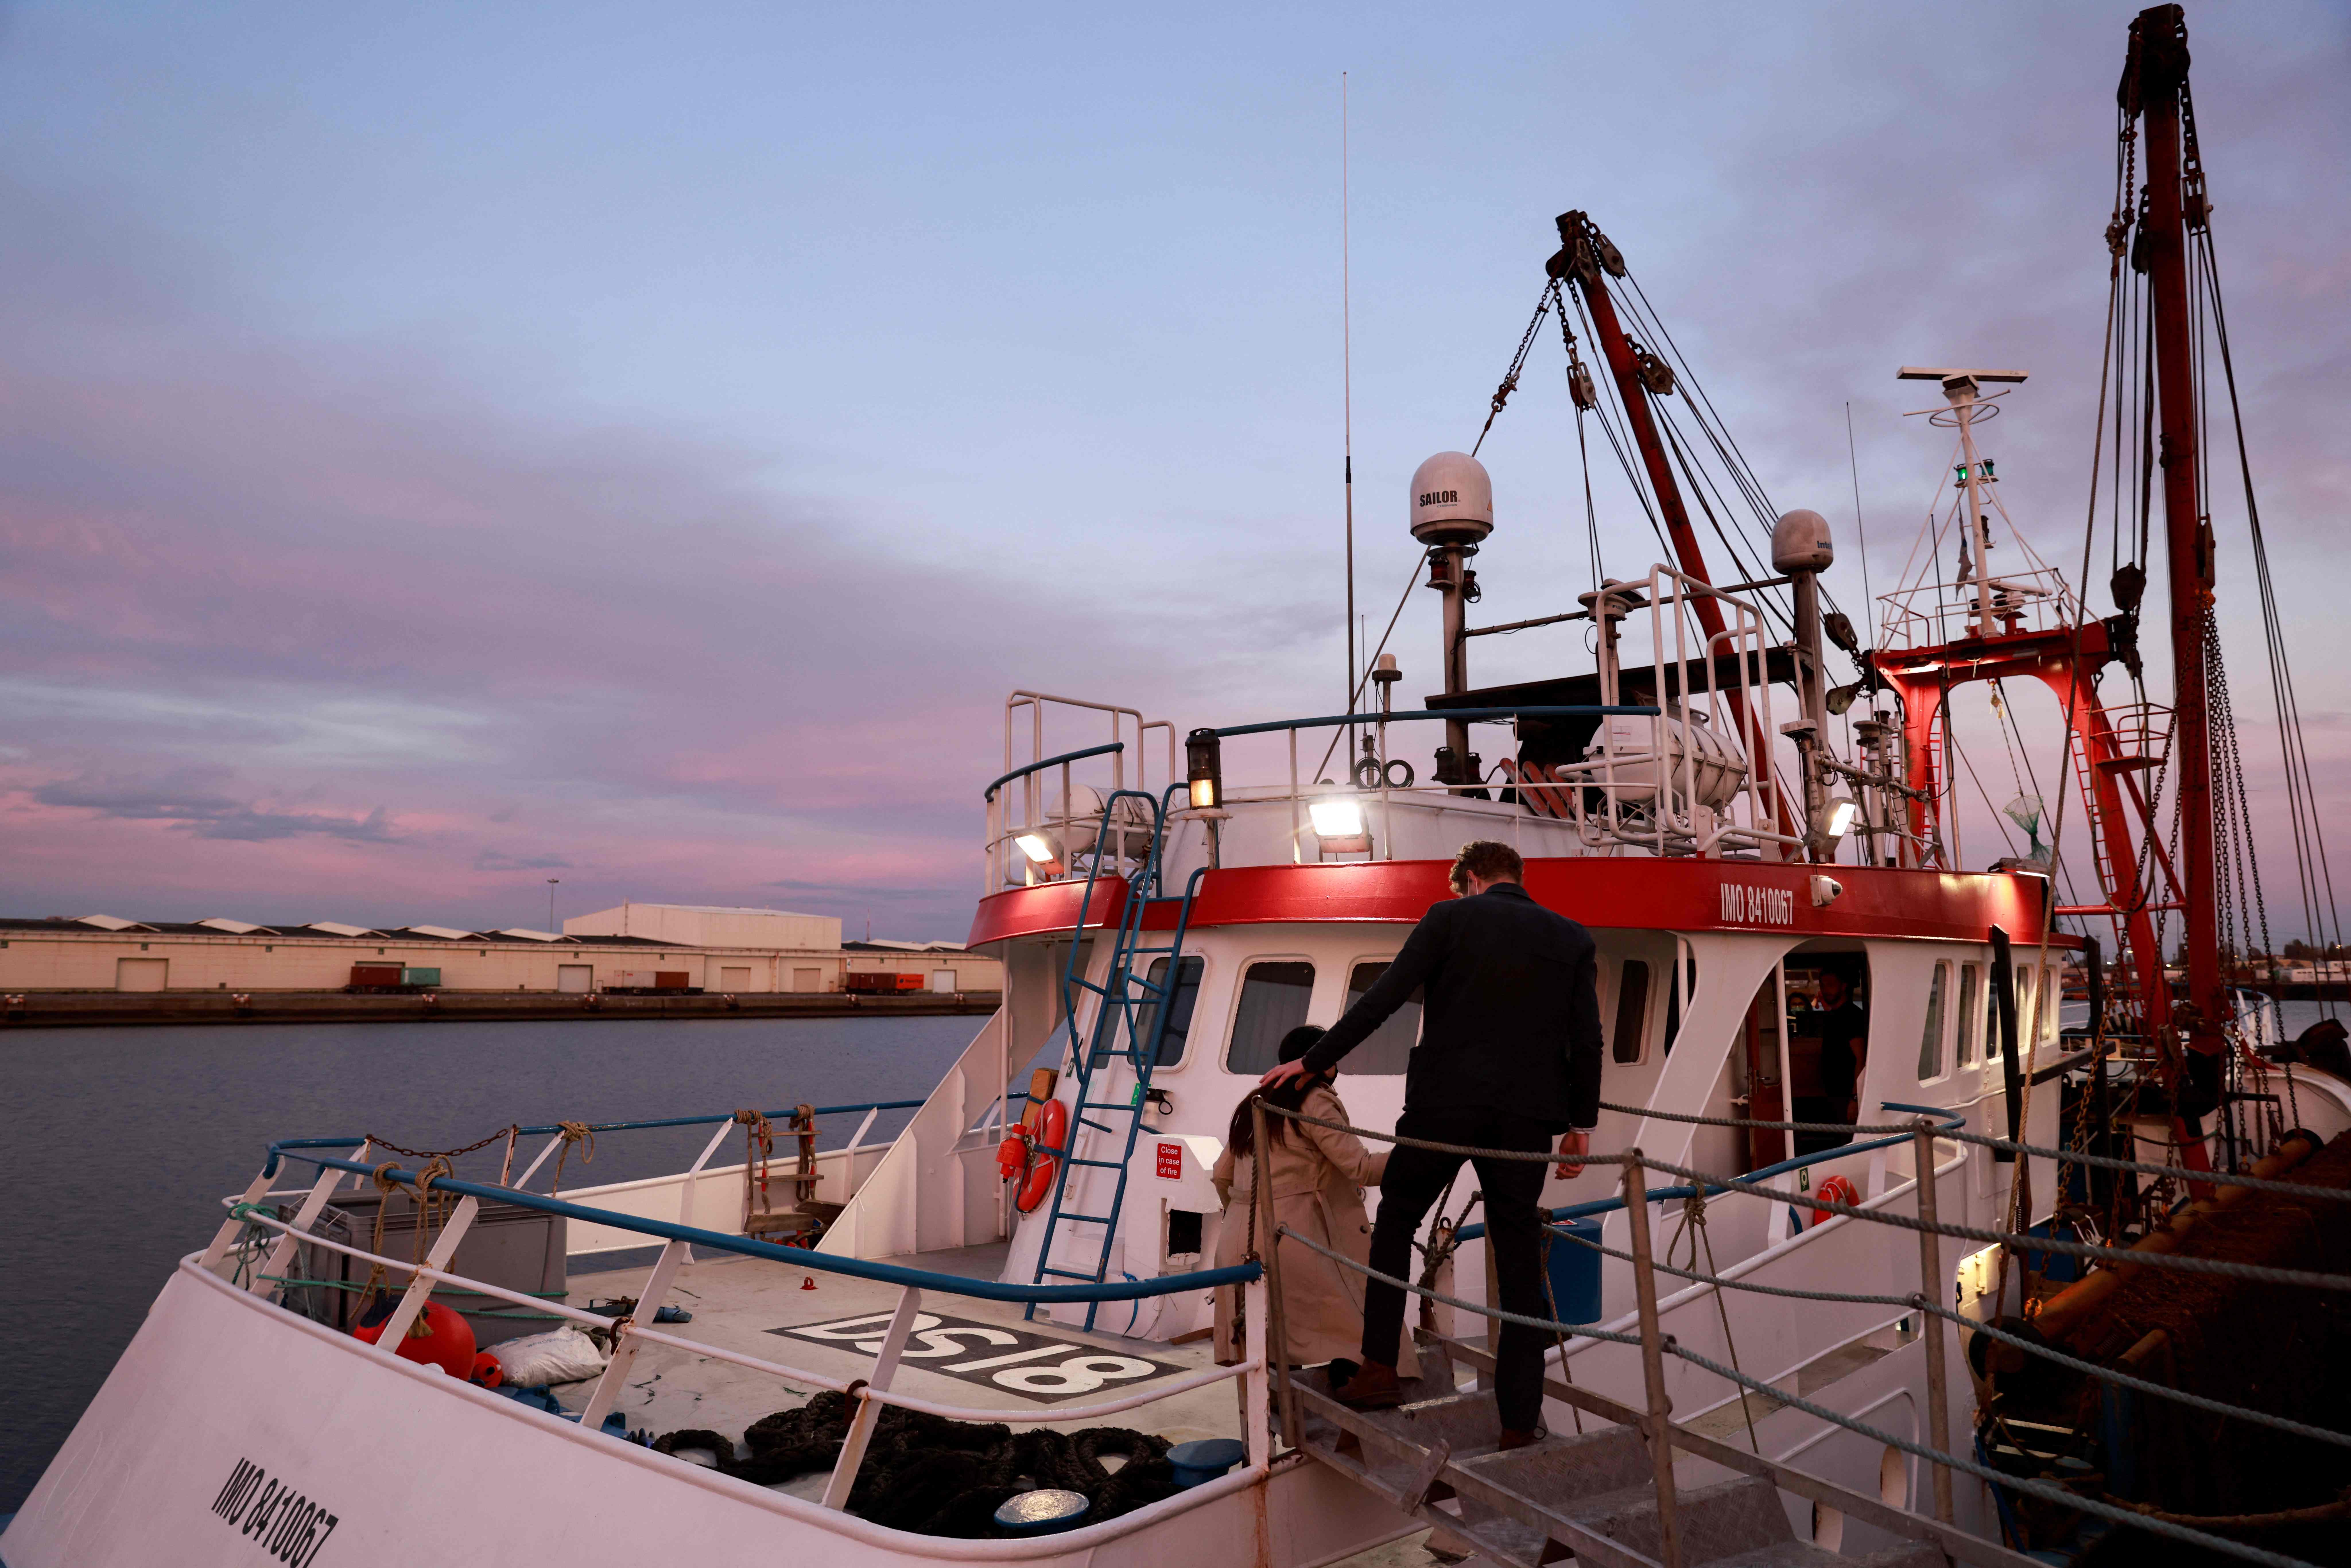 UK embassy officials arrive at the British trawler detained in Le Havre